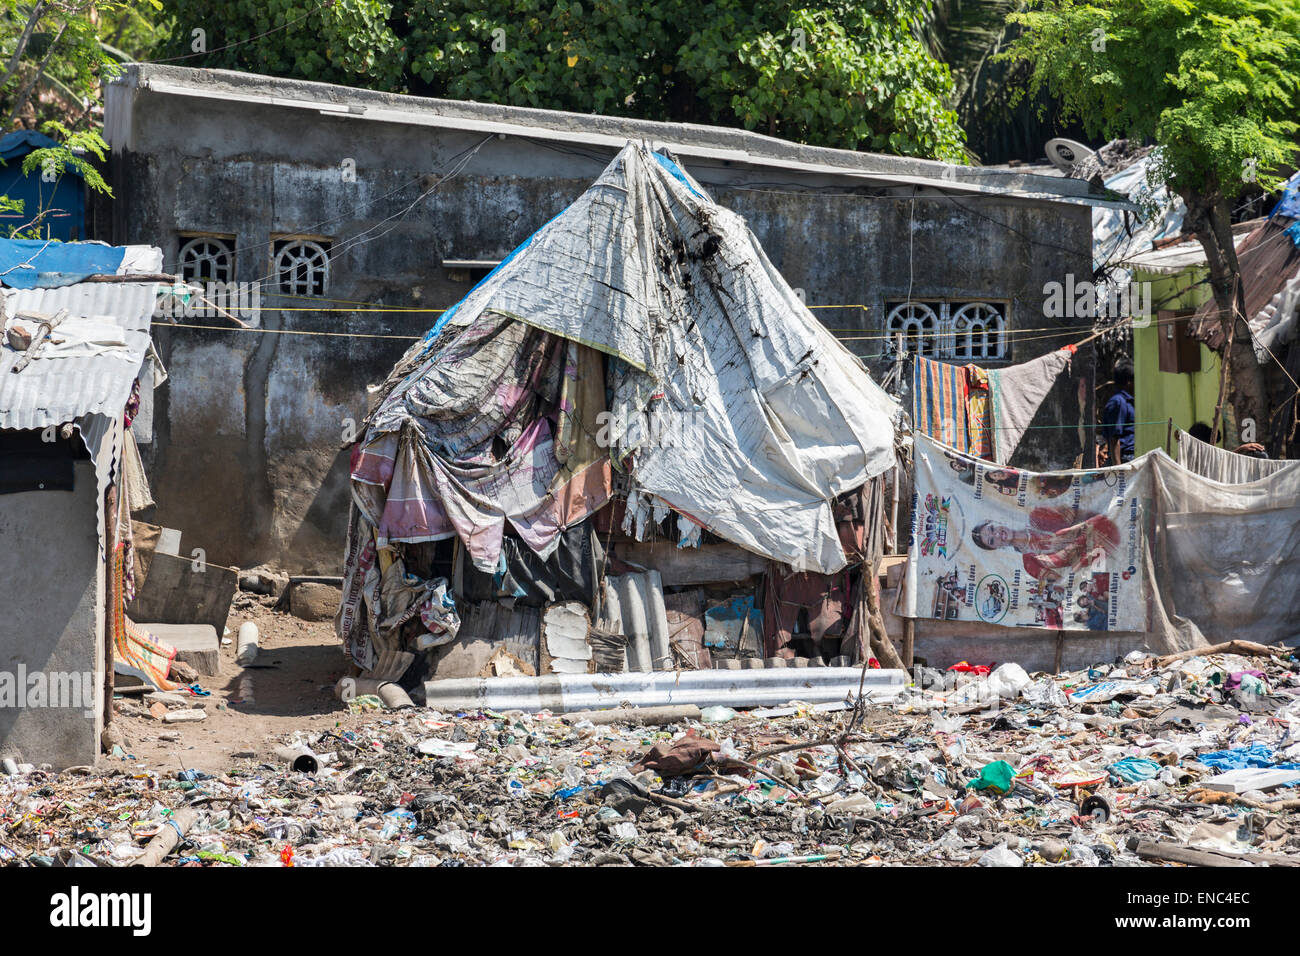 Third world poverty lifestyle: Poor tent slums on the banks of the polluted Adyar River estuary in Chennai, Tamil Nadu, southern India Stock Photo